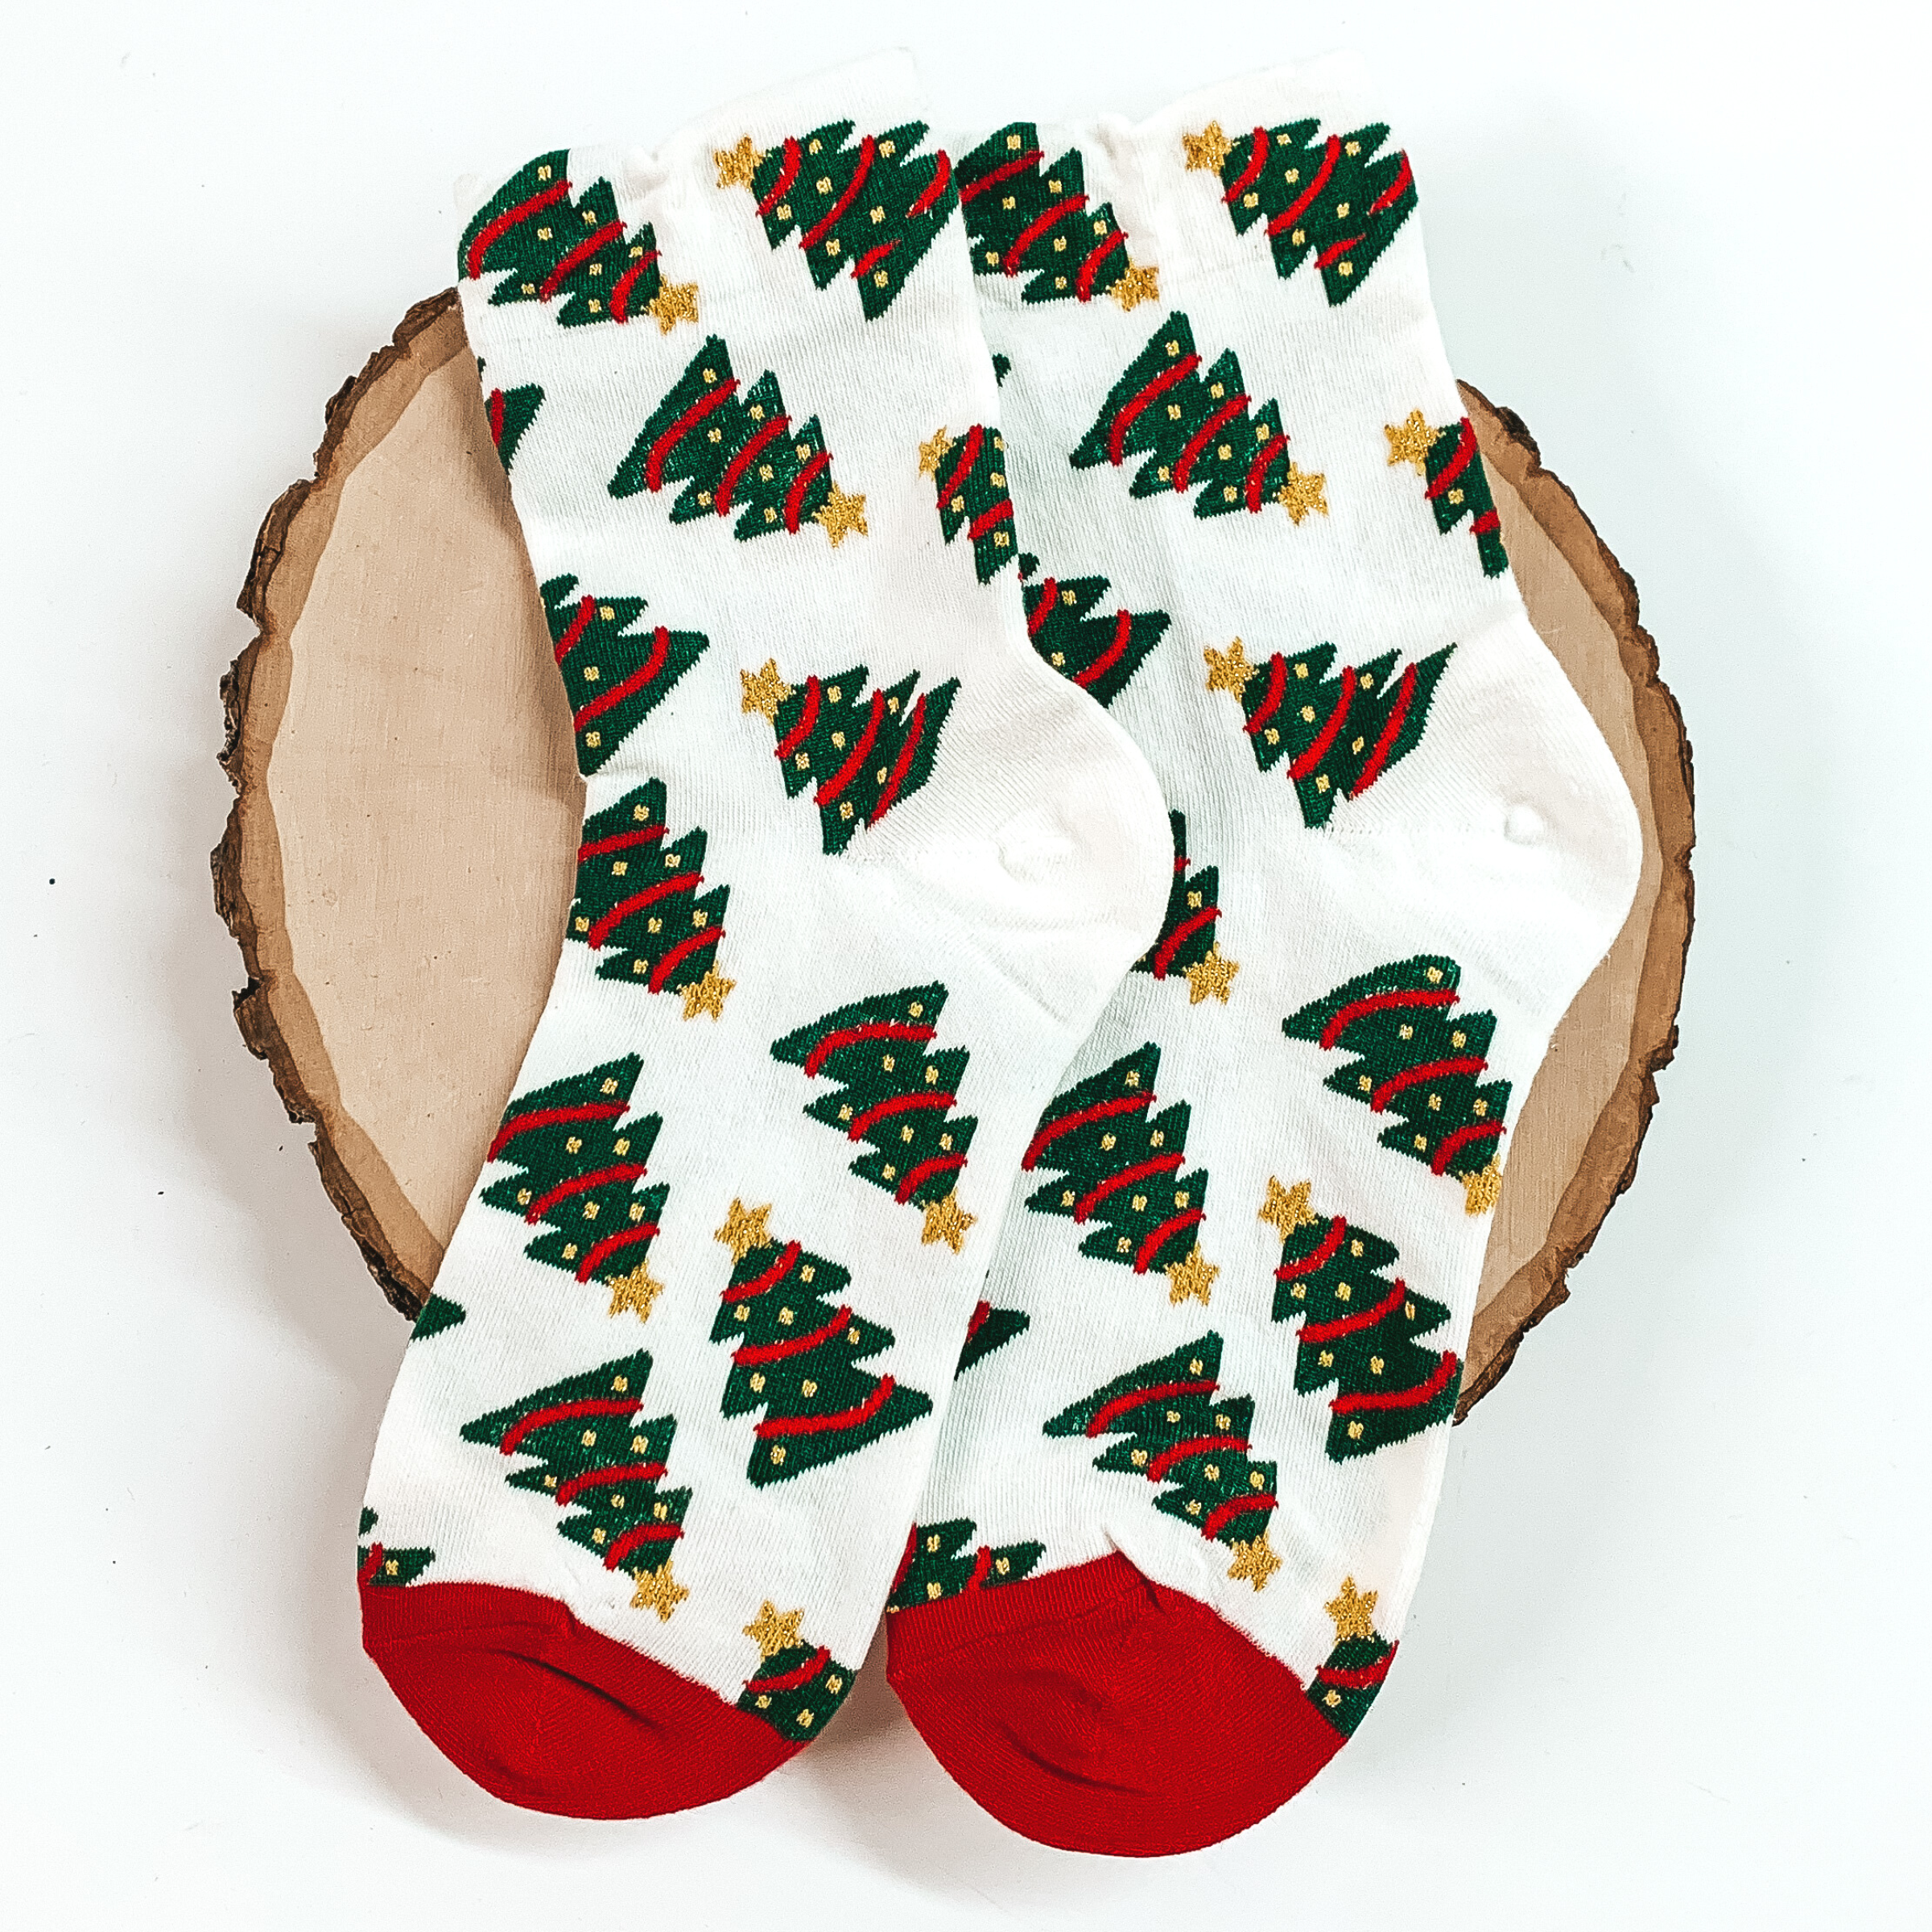 White ankle socks with red toes and a christmas tree design. These socks are pictured on a piece of wood on a white background. 